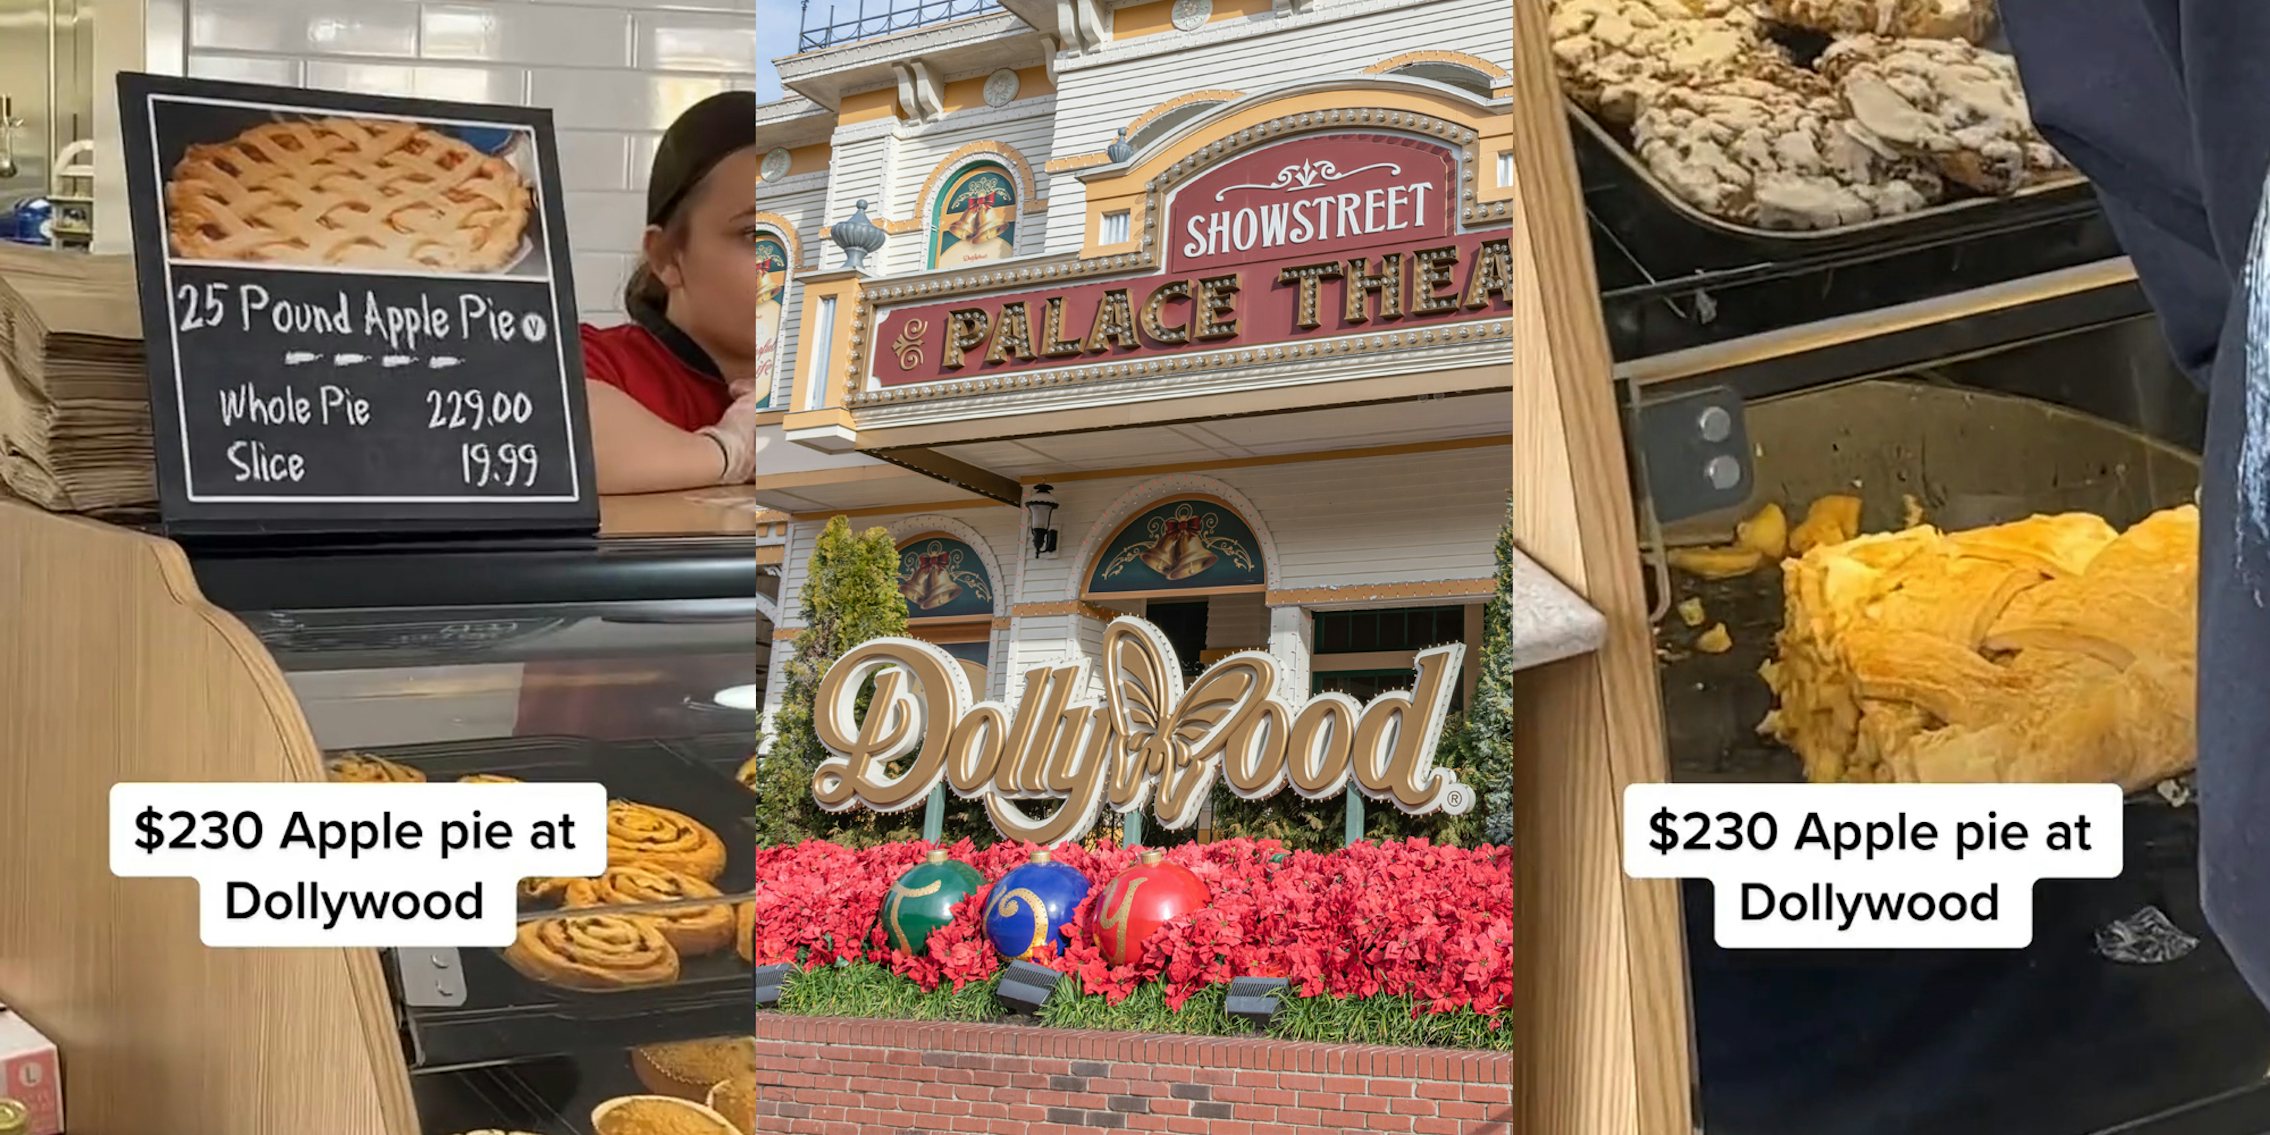 sign for 25 pound apple pie with 229.00 for whole pie on bakery counter with caption '$230 Apple pie at Dollywood' (l) Dollywood Sign outside of theater (c) apple pie in bakery counter with caption '$230 Apple pie at Dollywood' (r)